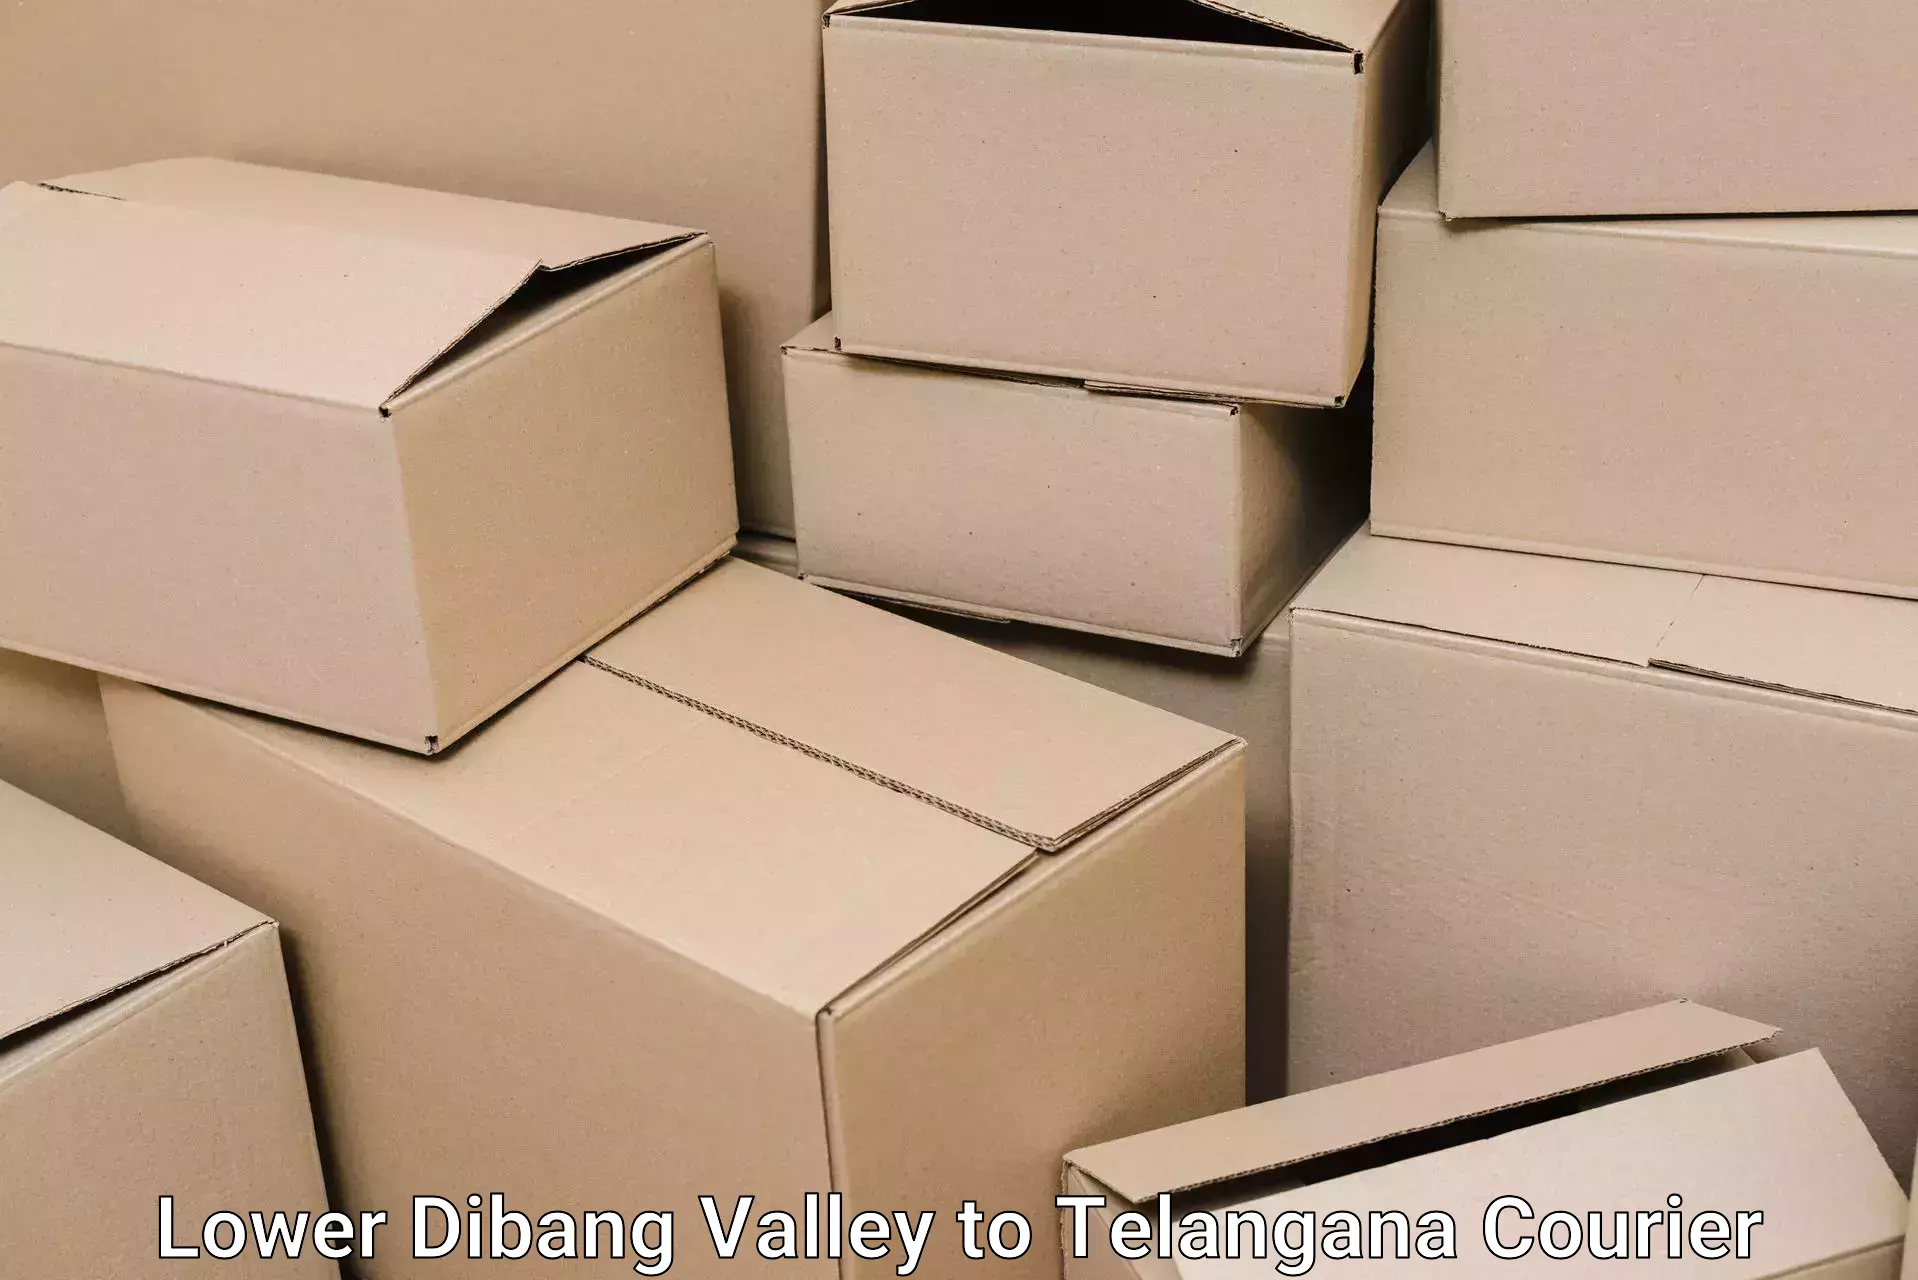 Furniture transport and logistics in Lower Dibang Valley to Yellareddipet